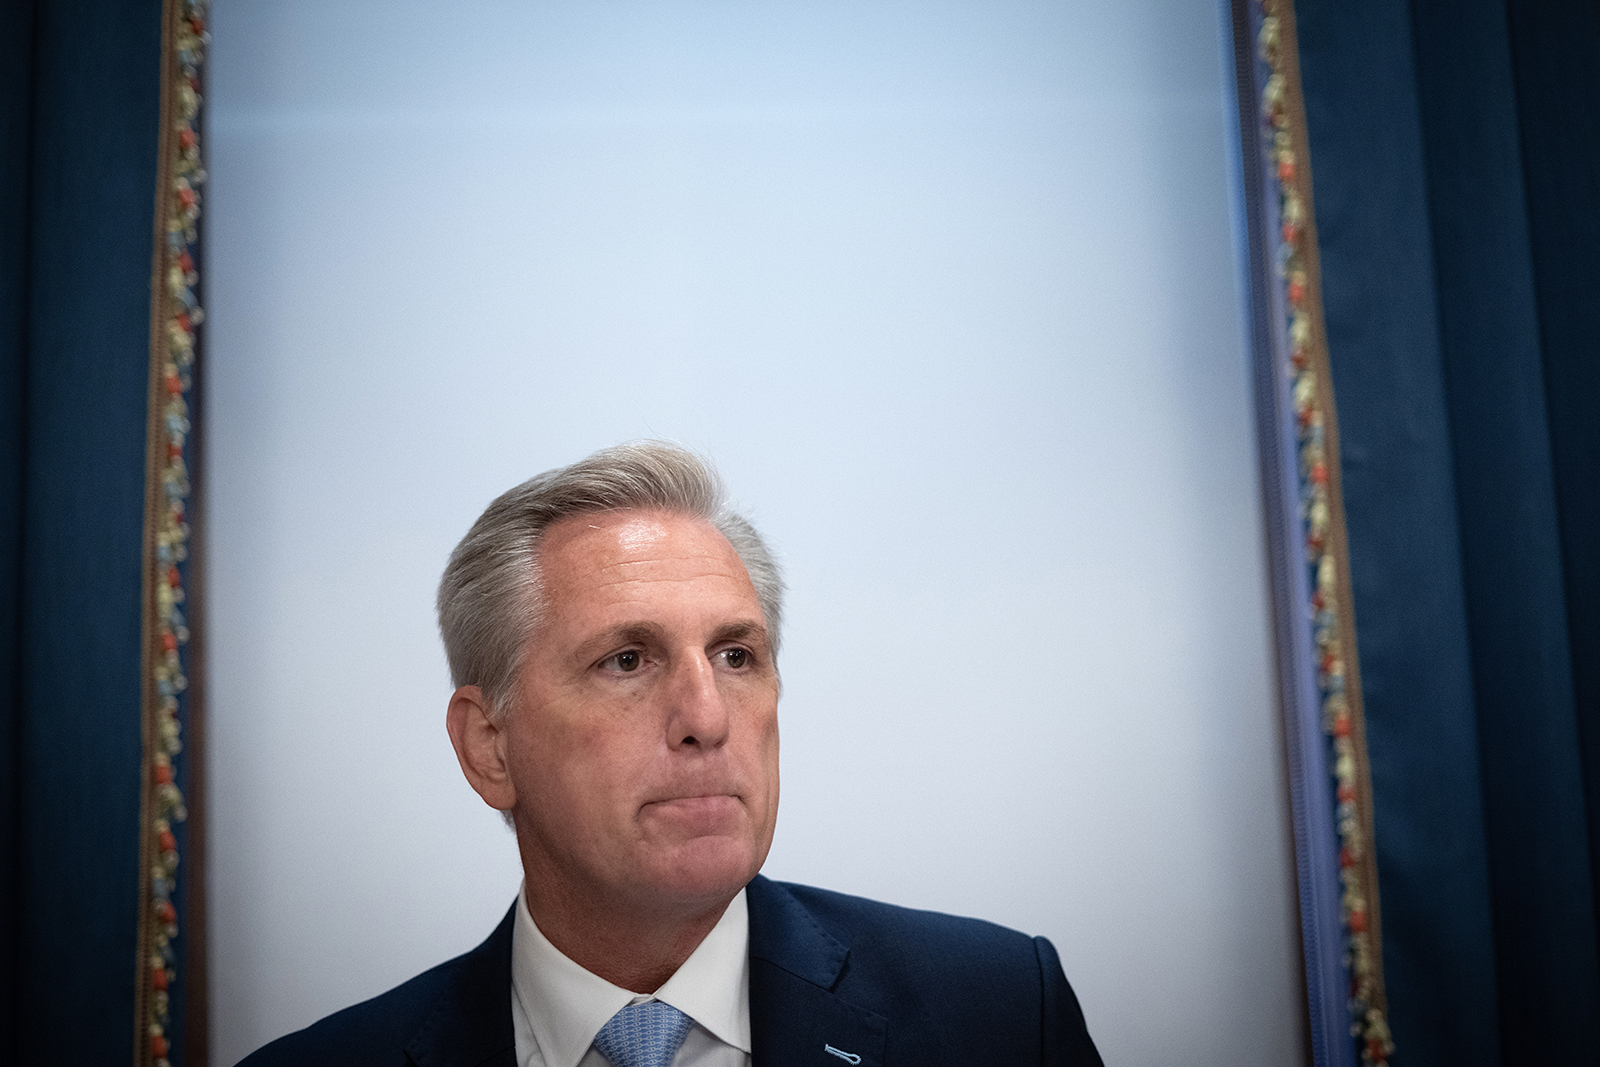 House Minority Leader Kevin McCarthy speaks with reporters after voting on the establishment of a commission to investigate the events of January 6 on May 19, in Washington, DC.